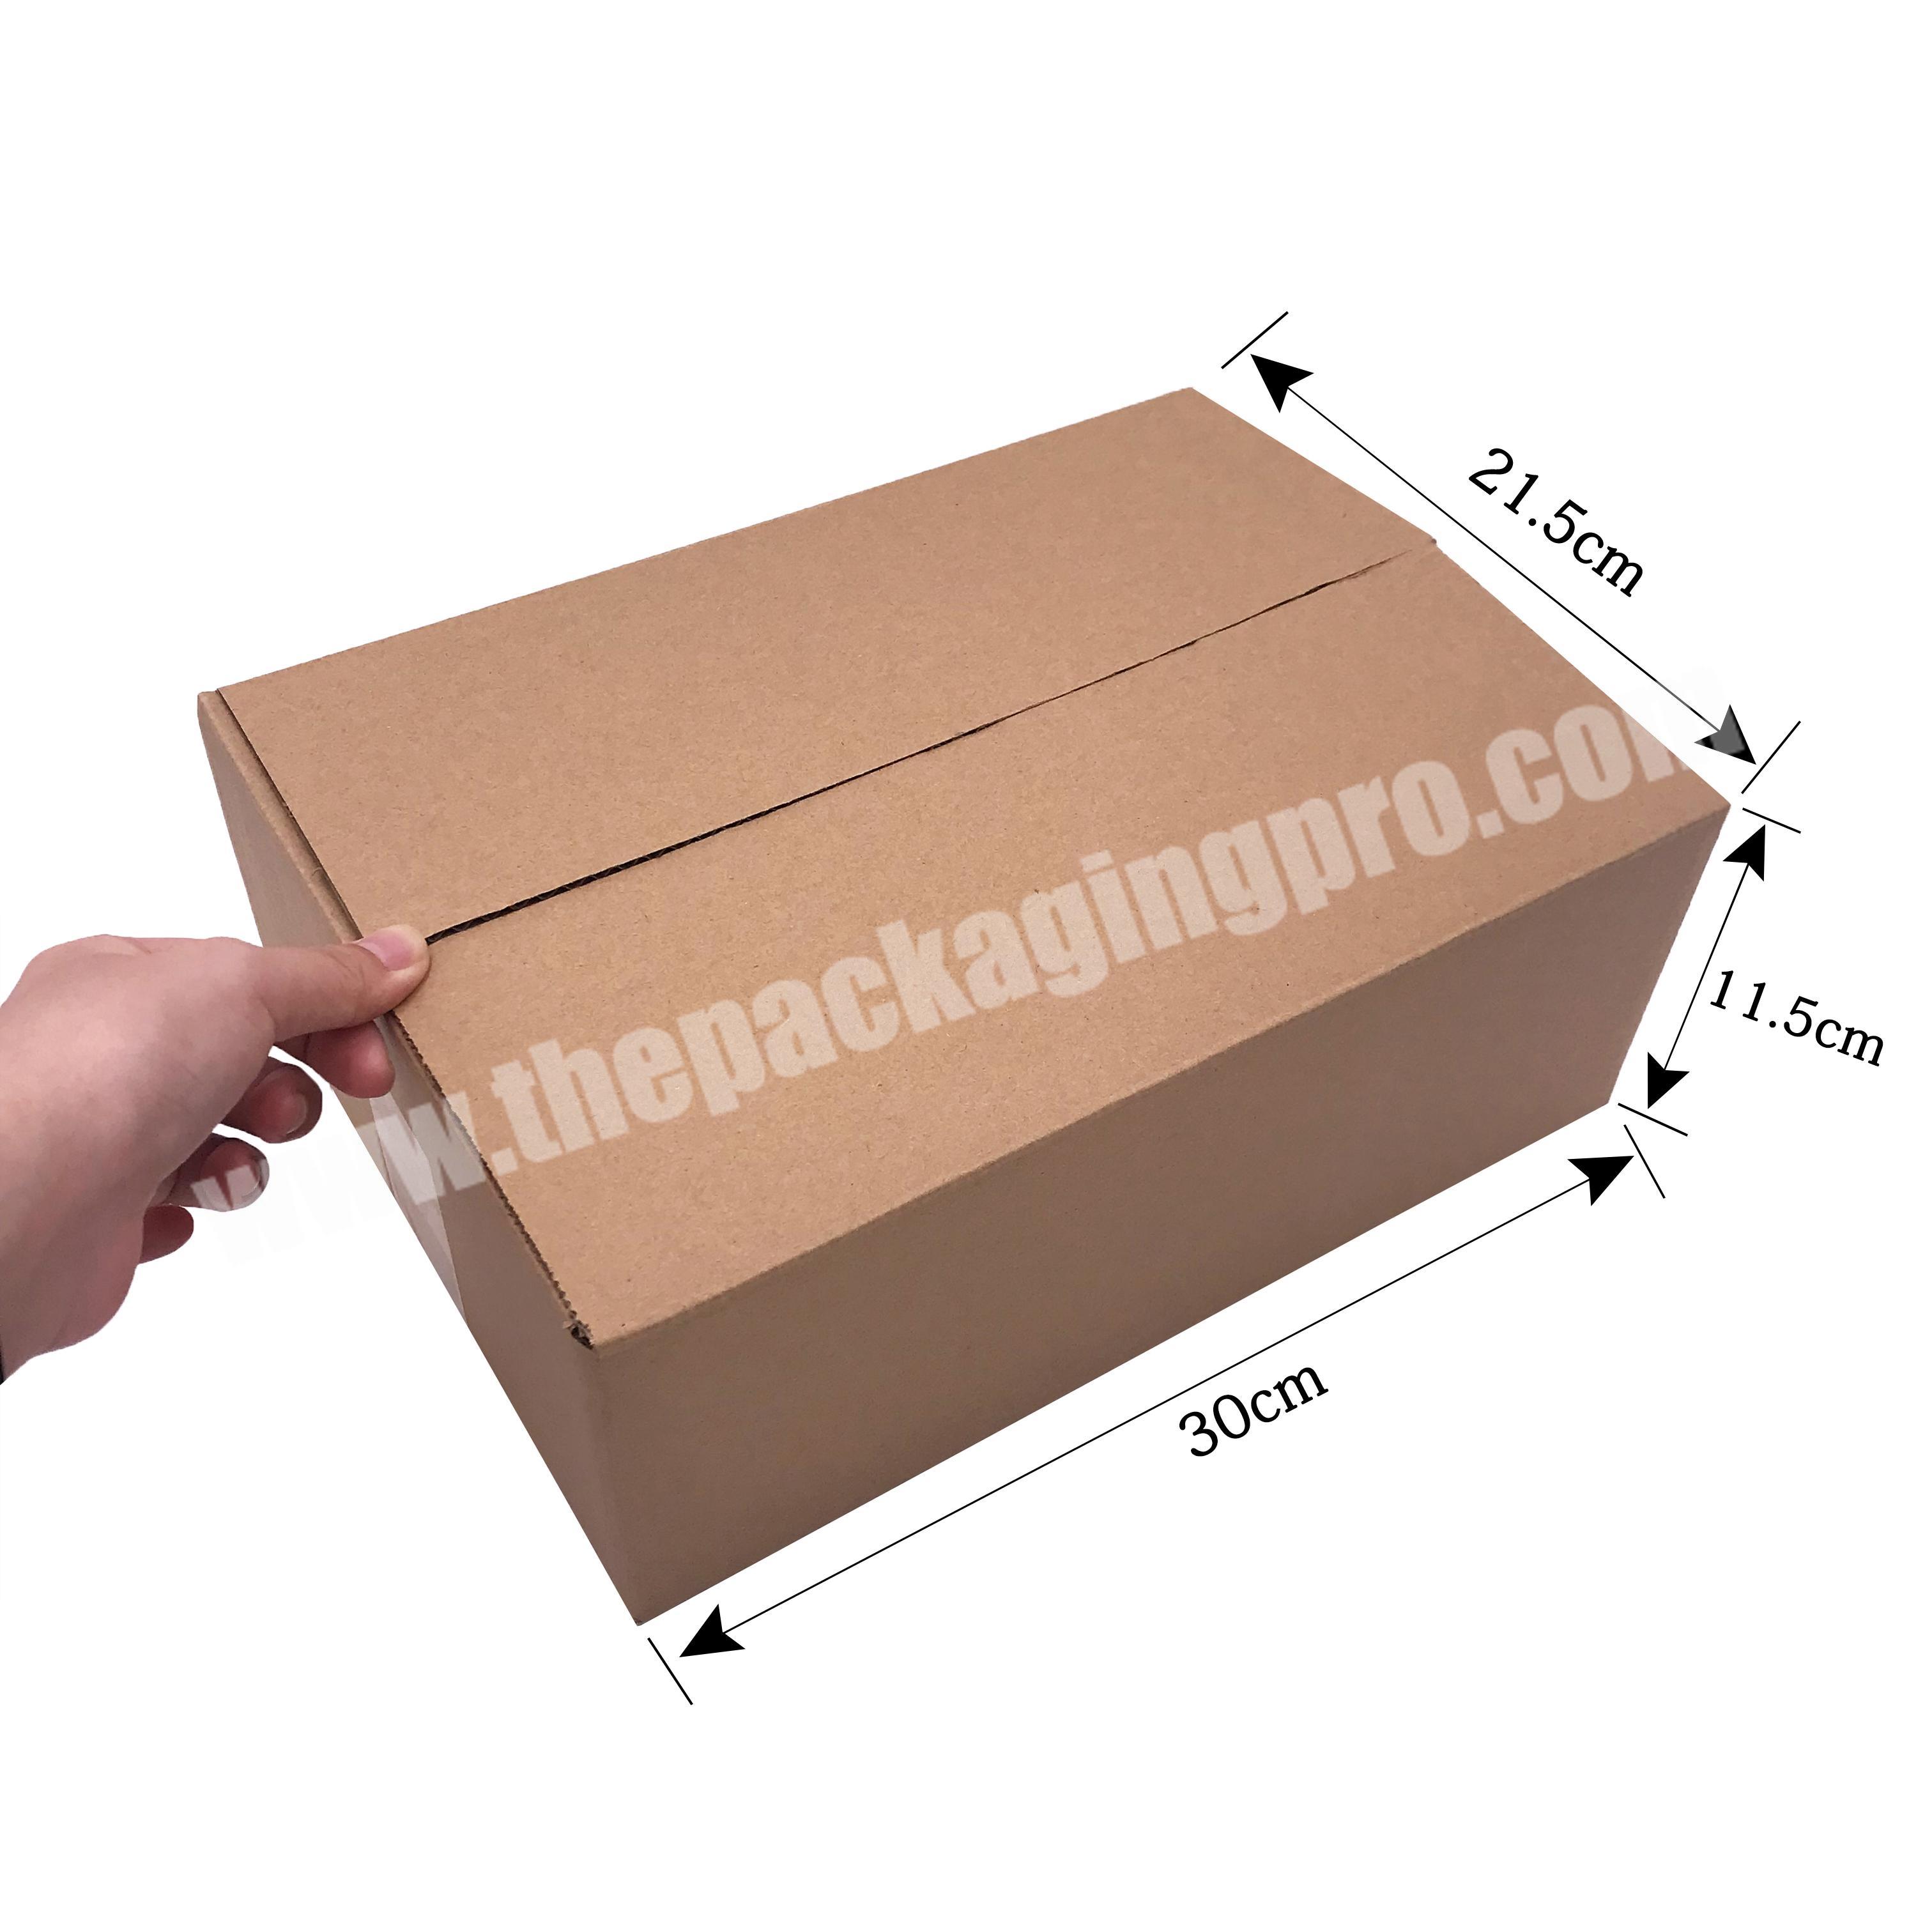 Professional factory shipping boxes with dividers box foam server